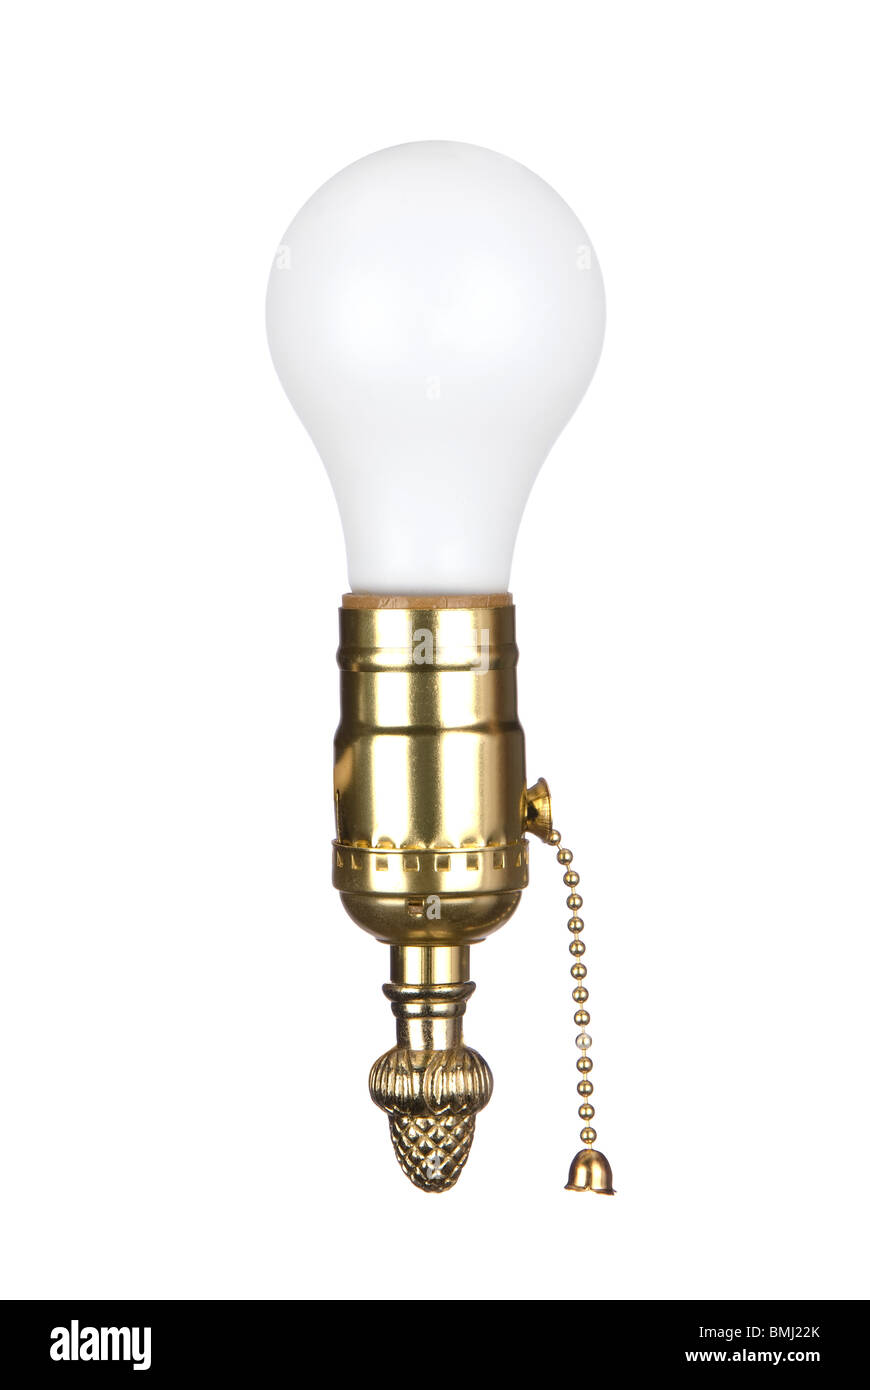 A light bulb in an electrical brass socket with pull chain. Stock Photo